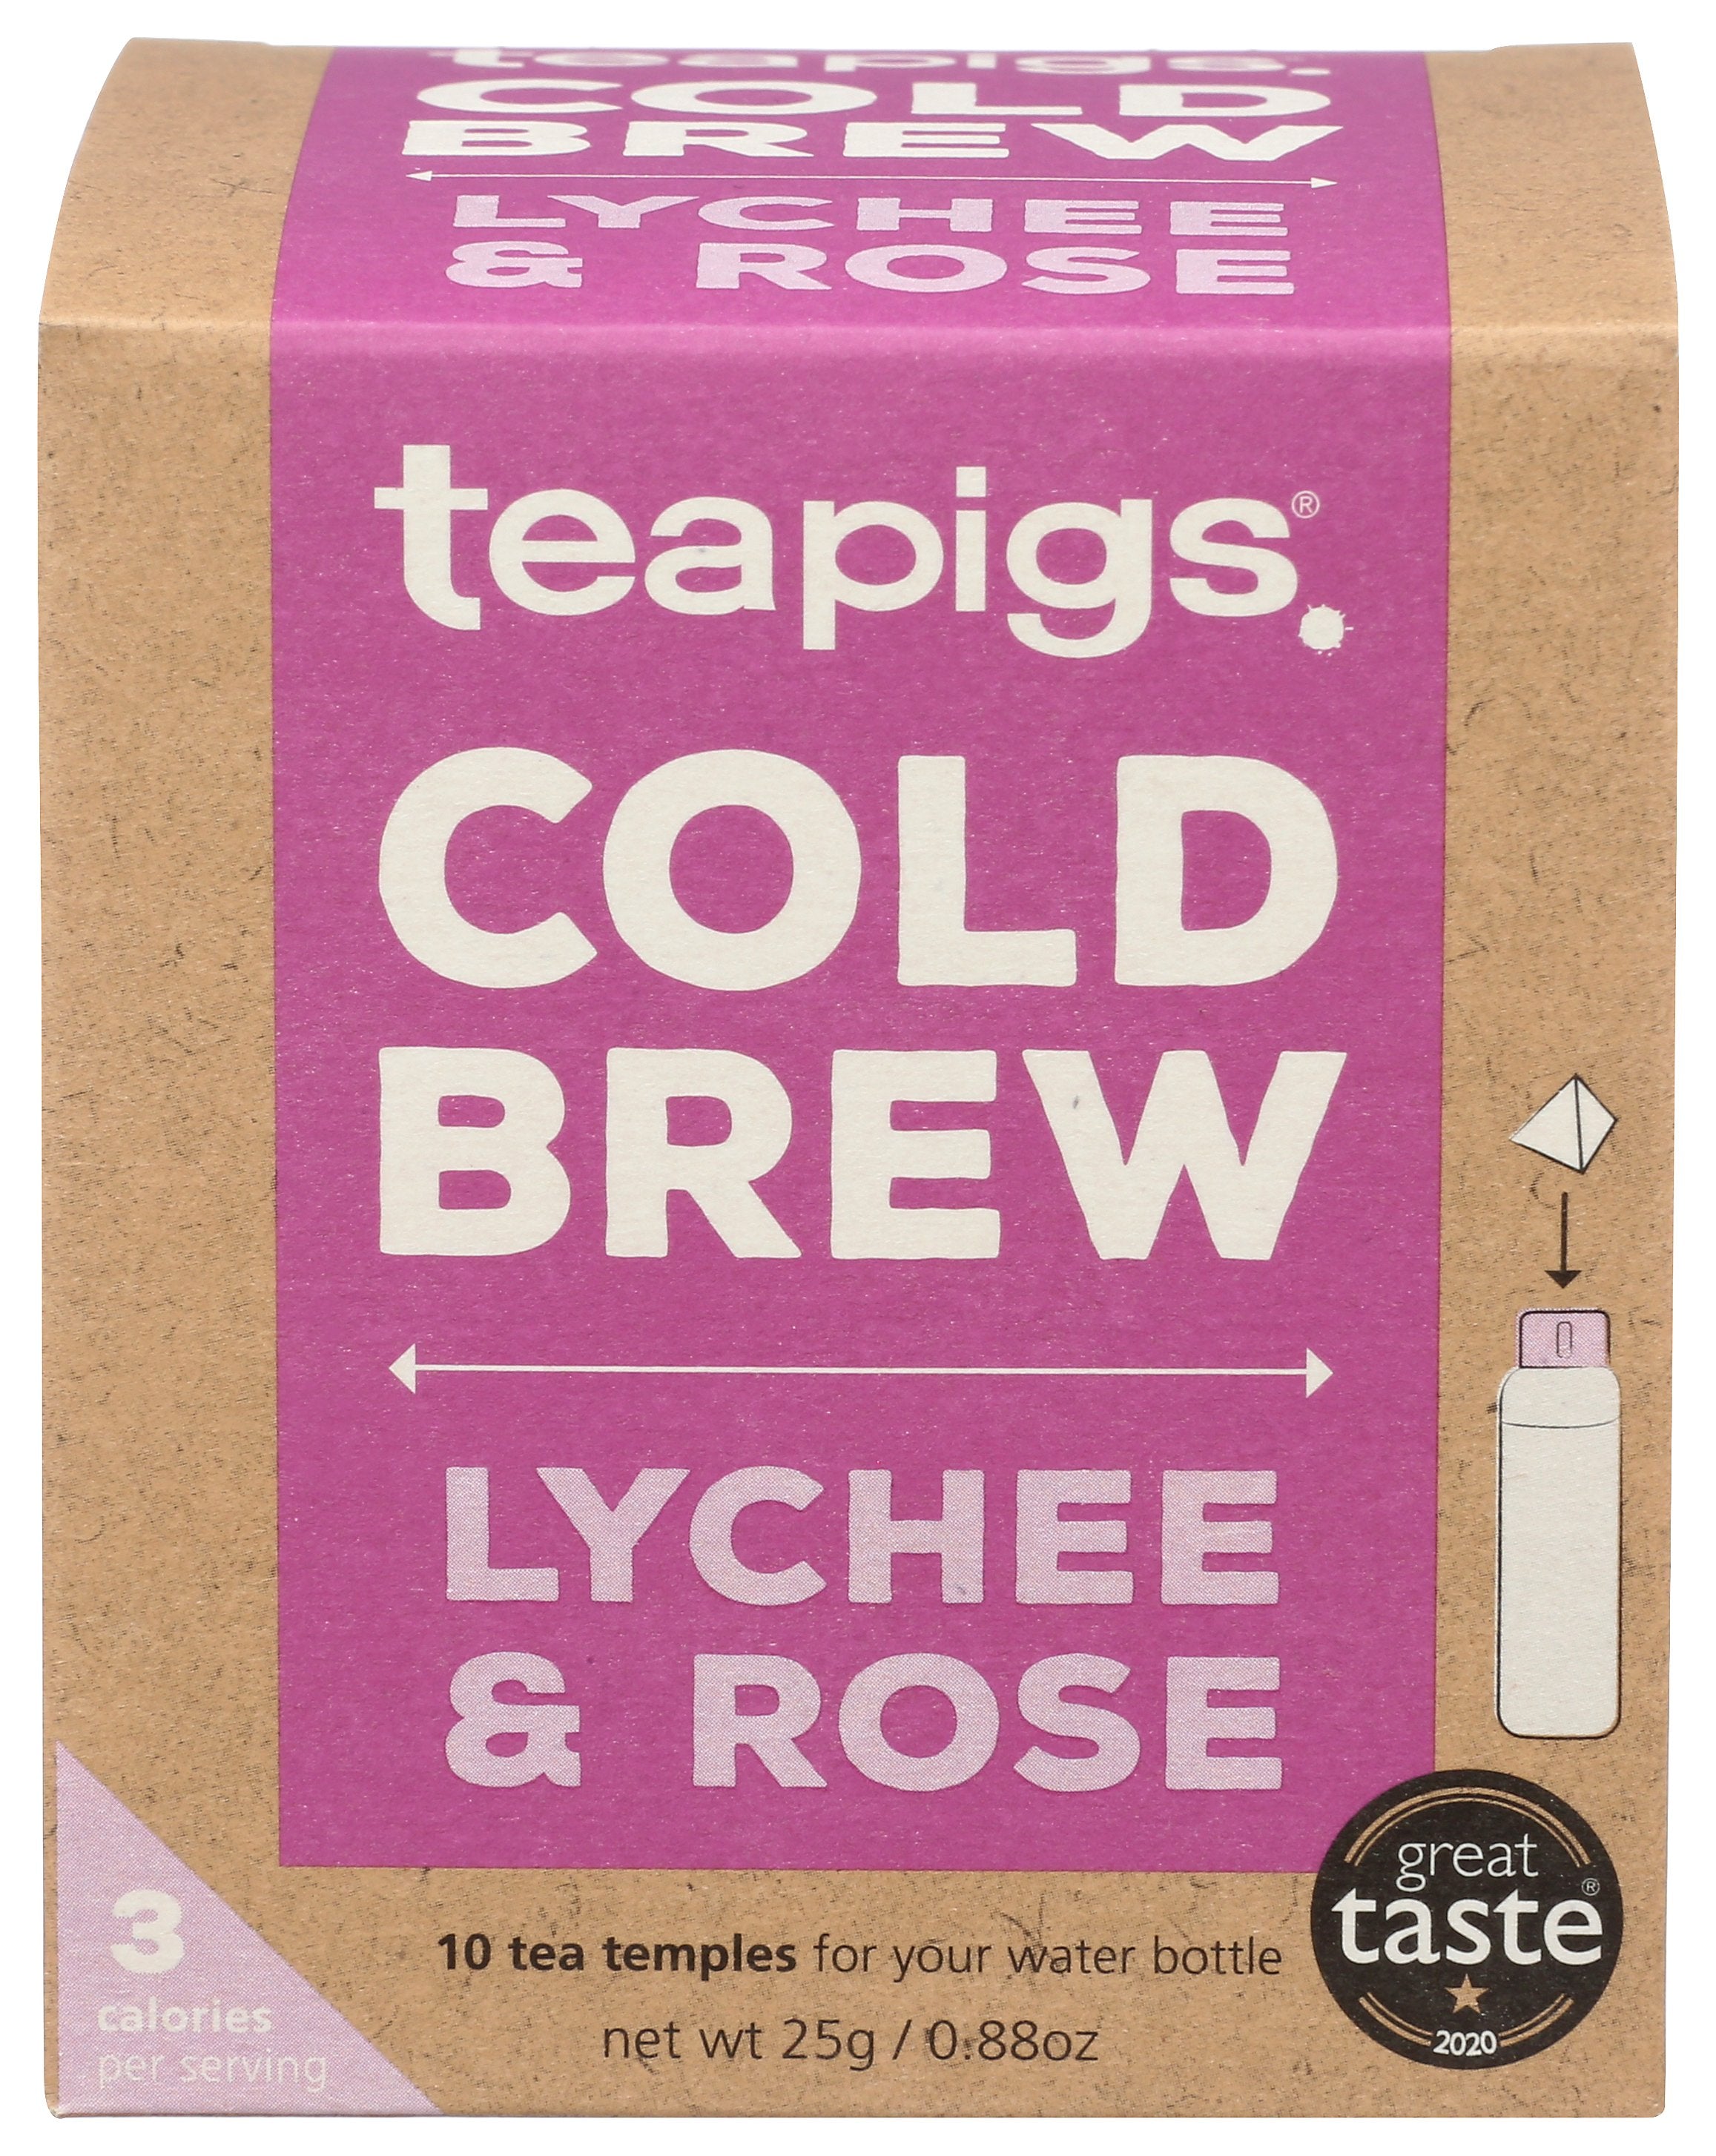 TEAPIGS COLD BREW LYCHEE & ROSE - Case of 6